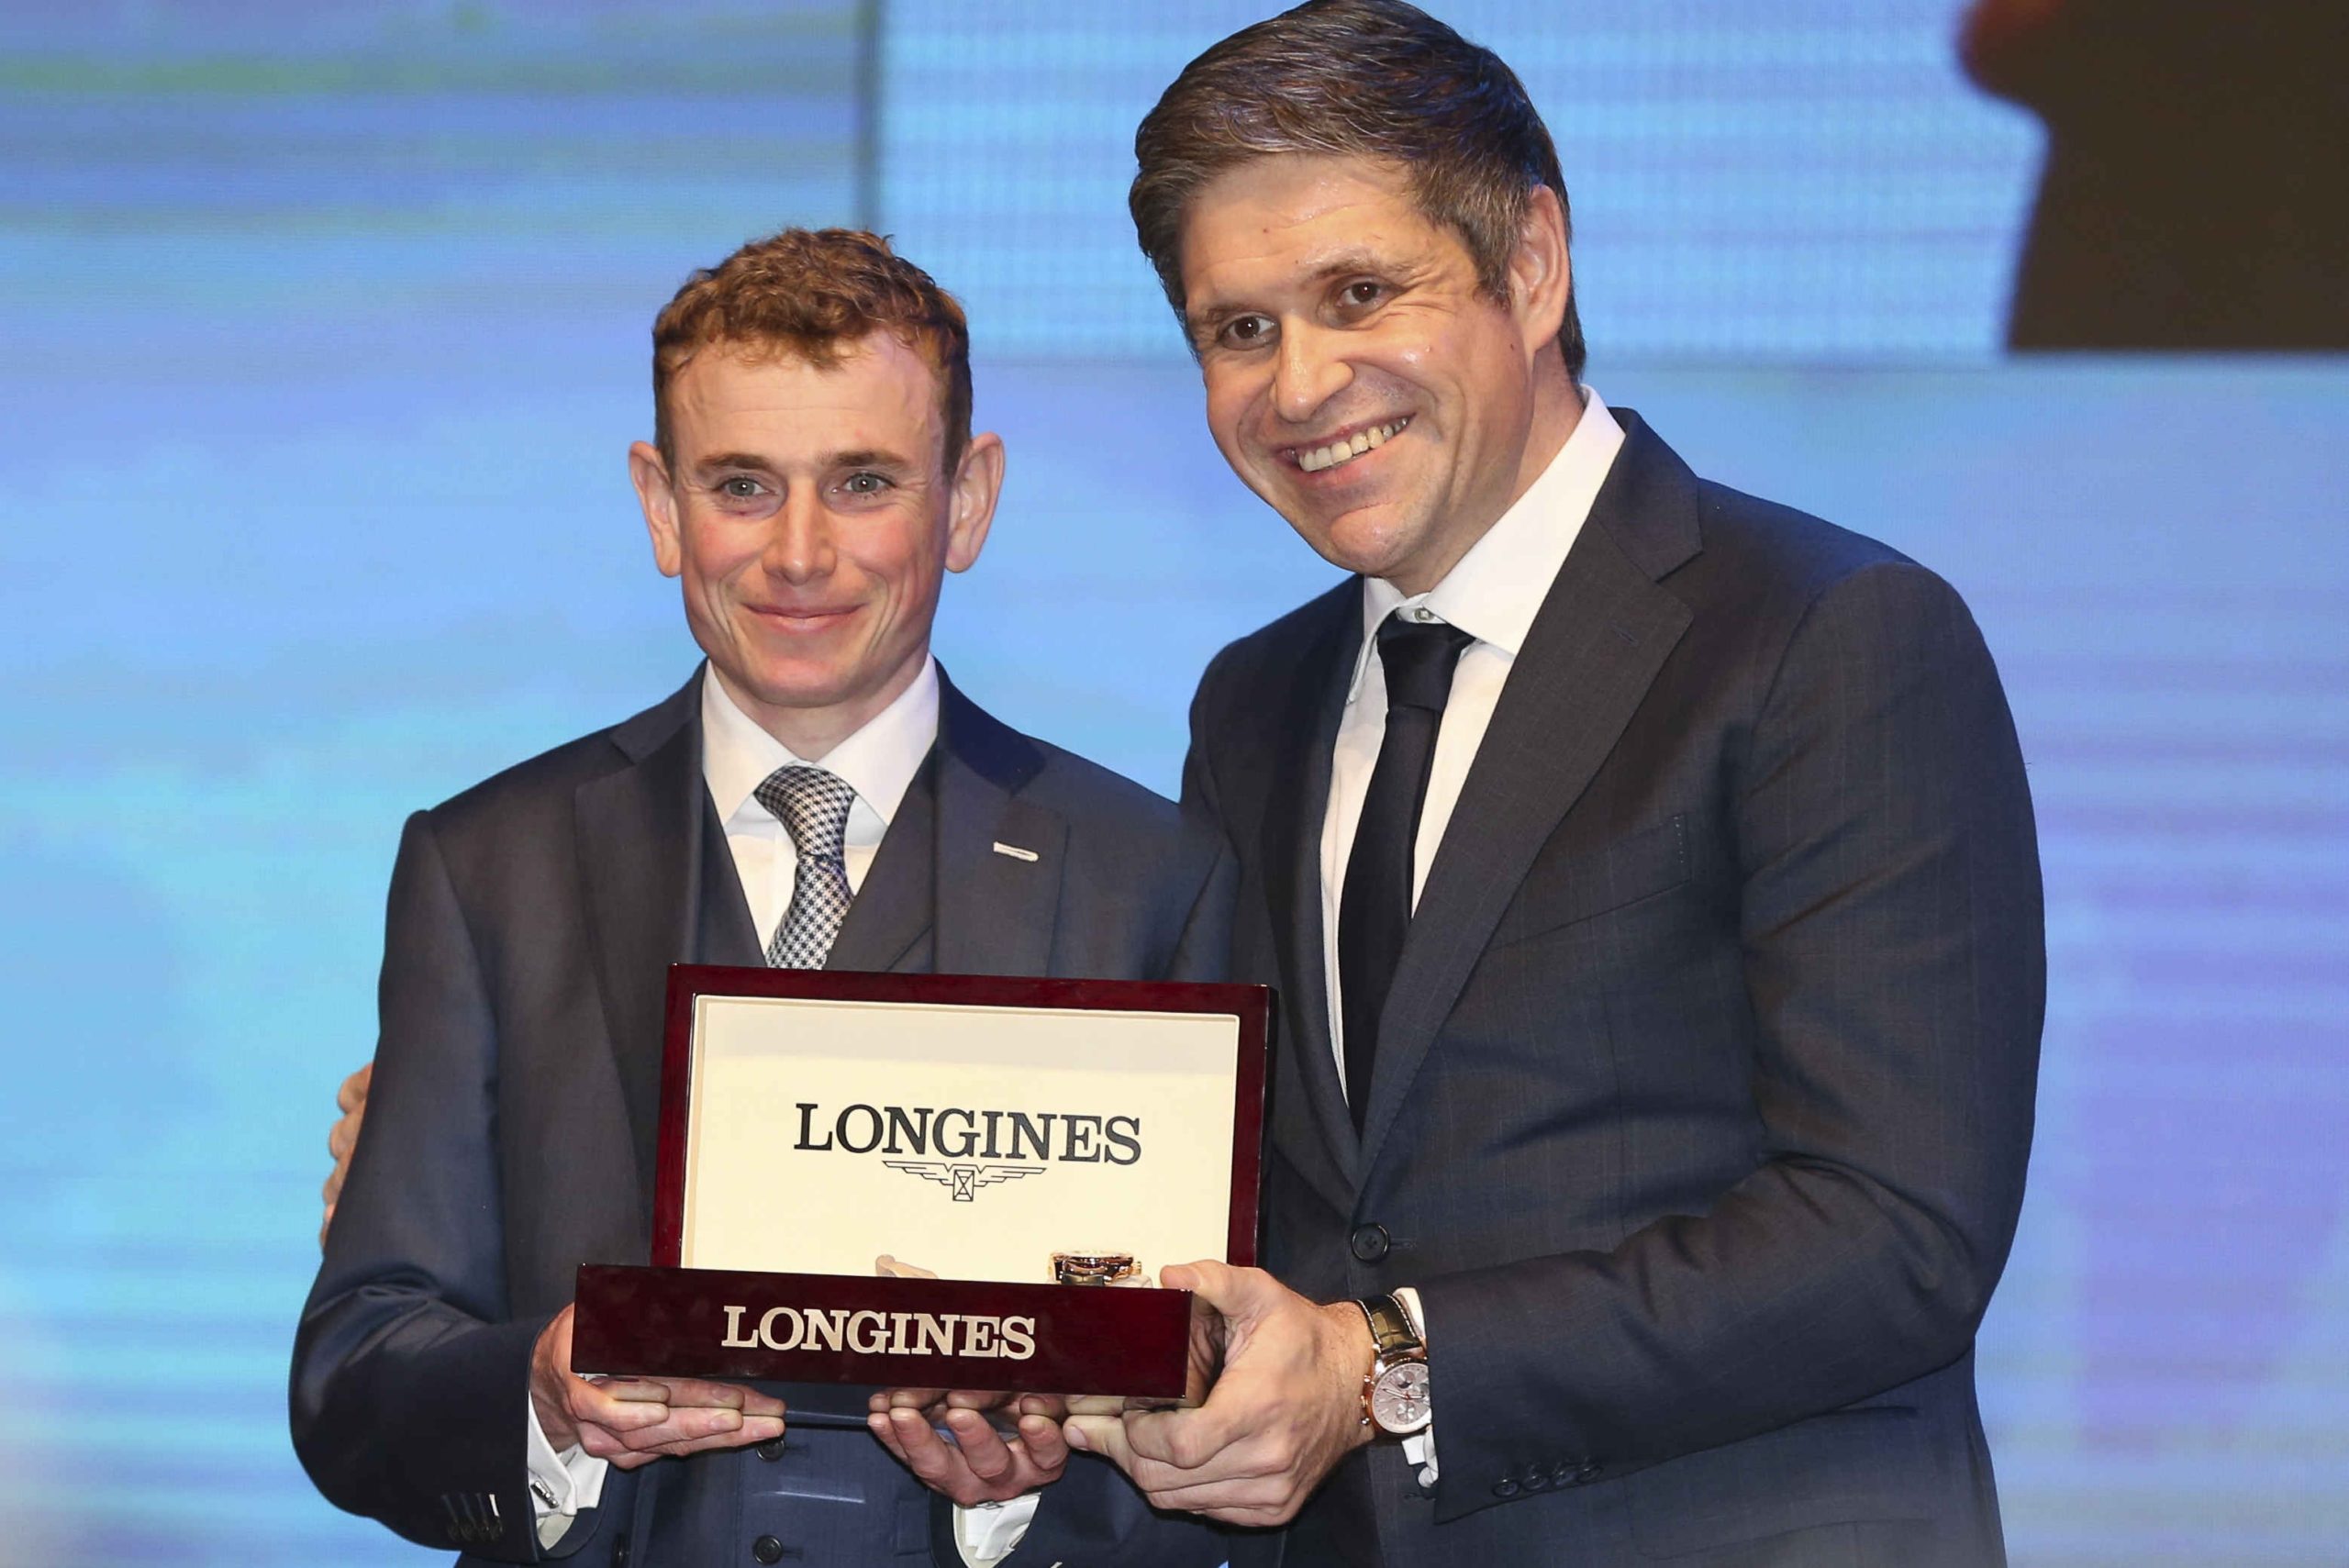 Ryan Moore, winner of the inaugural Longines World’s Best Jockey Award 2014, was presented with a Conquest Classic Moonphase chronograph from the hands of Juan-Carlos Capelli, Longines Vice-President and Head of International Marketing.